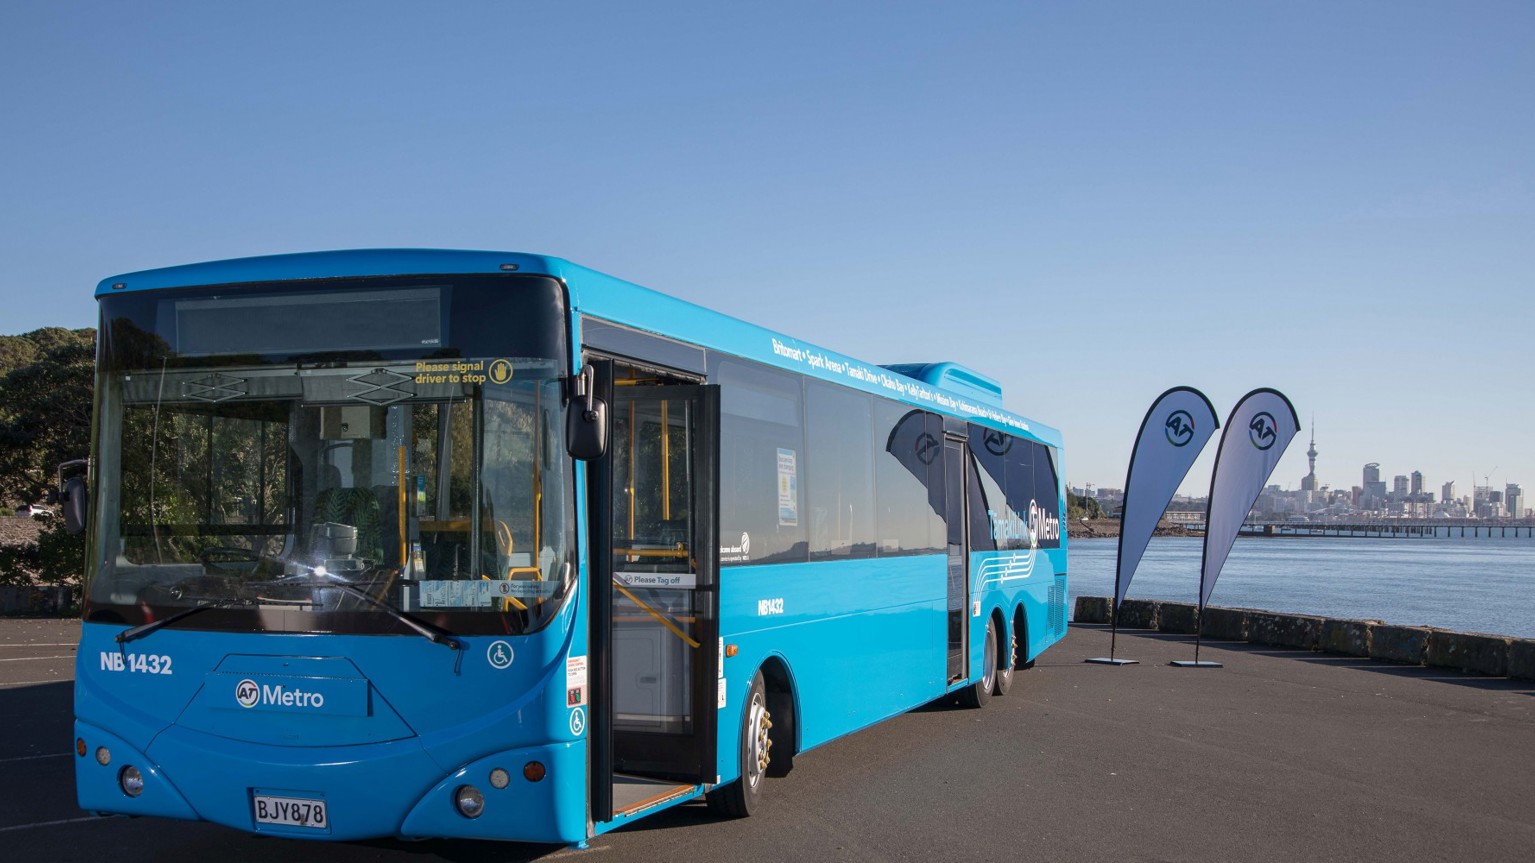 Tāmaki Link blue bus parked on the side of the road with the Auckland skyline in the background.